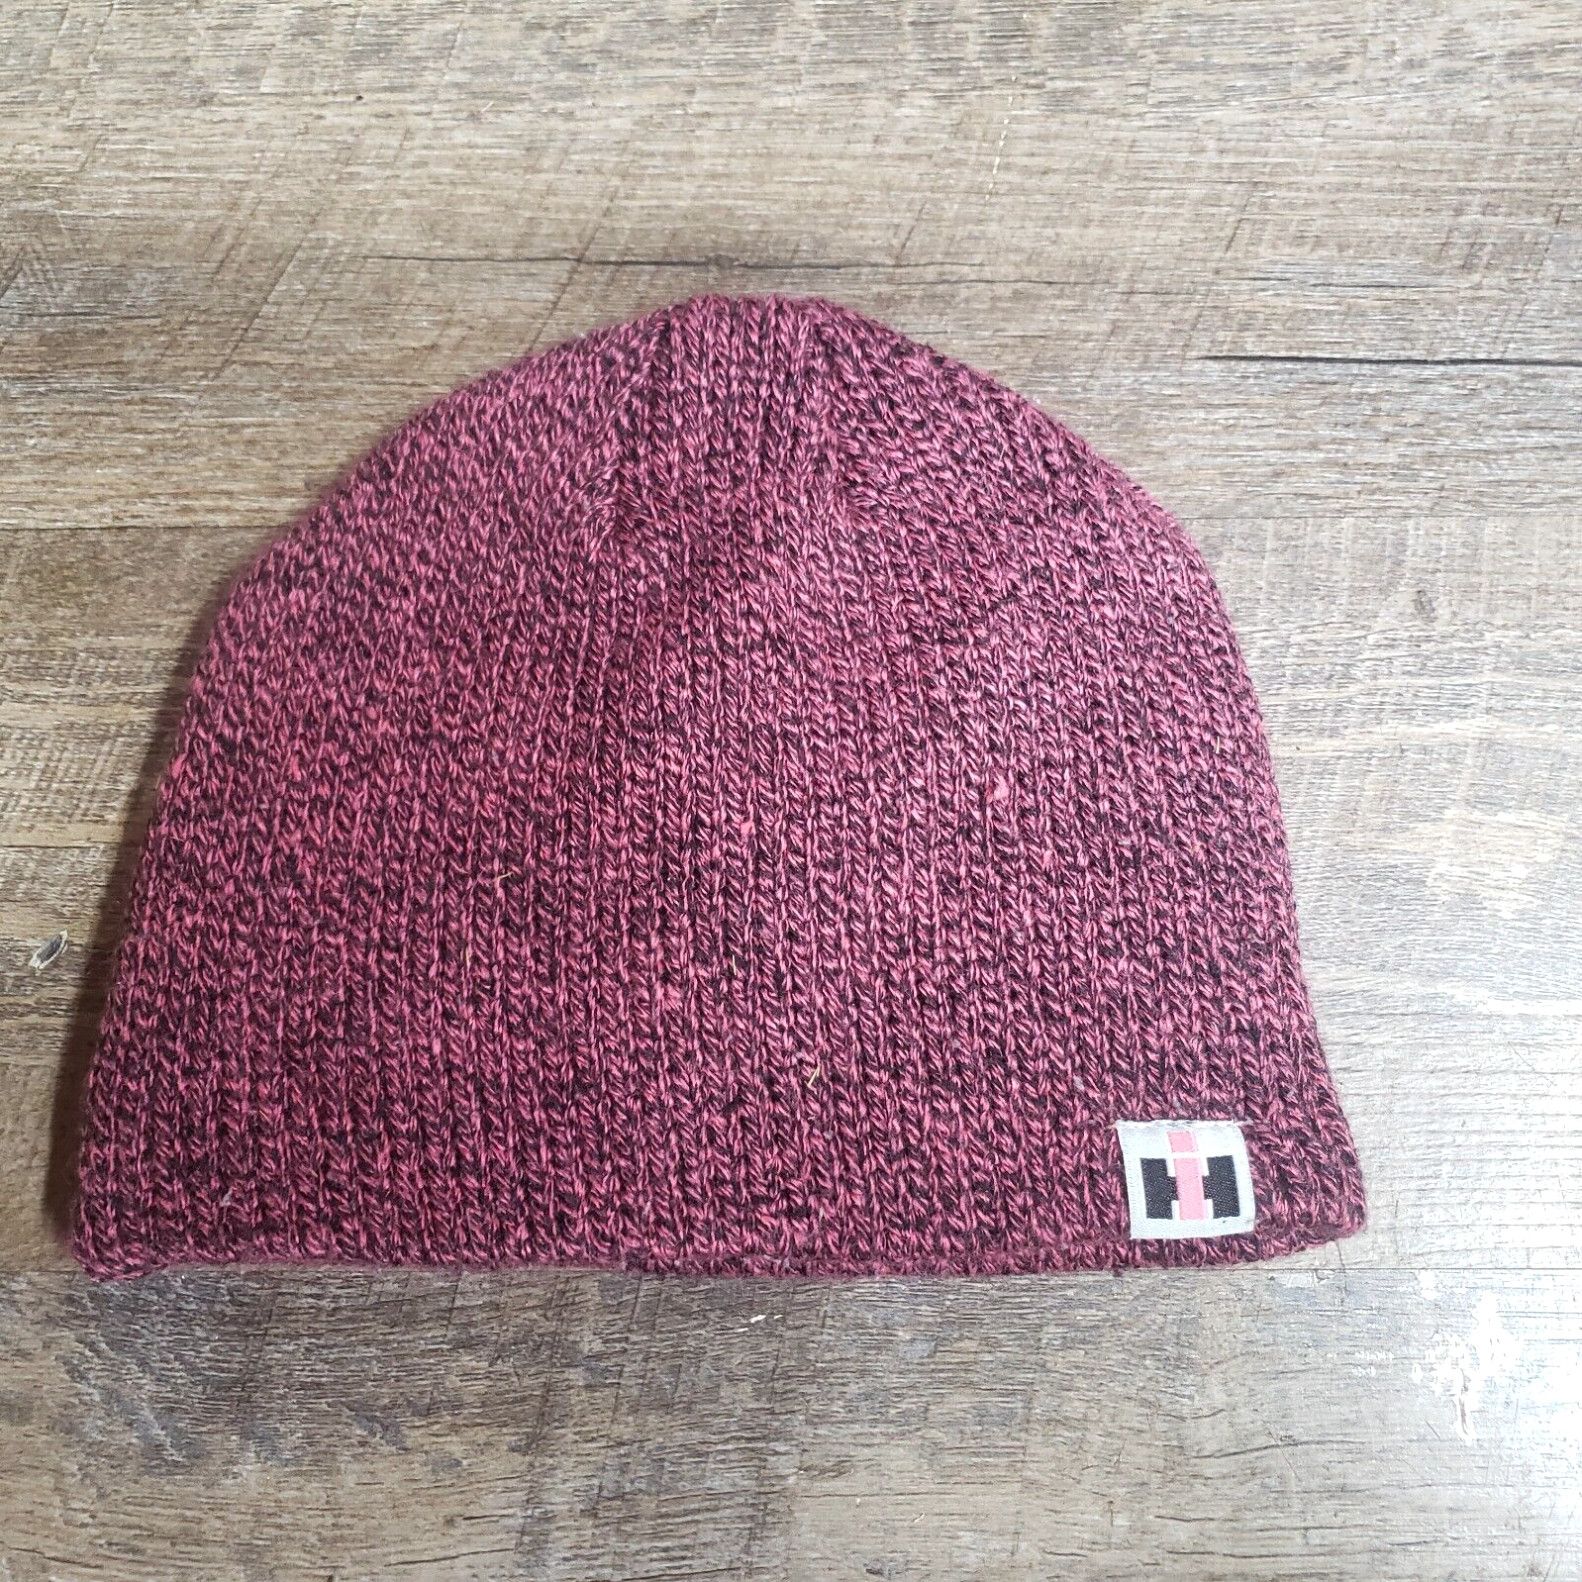 Vintage International Harvester Pink Logo Beanie Hat Size ONE SIZE - 1 Preview